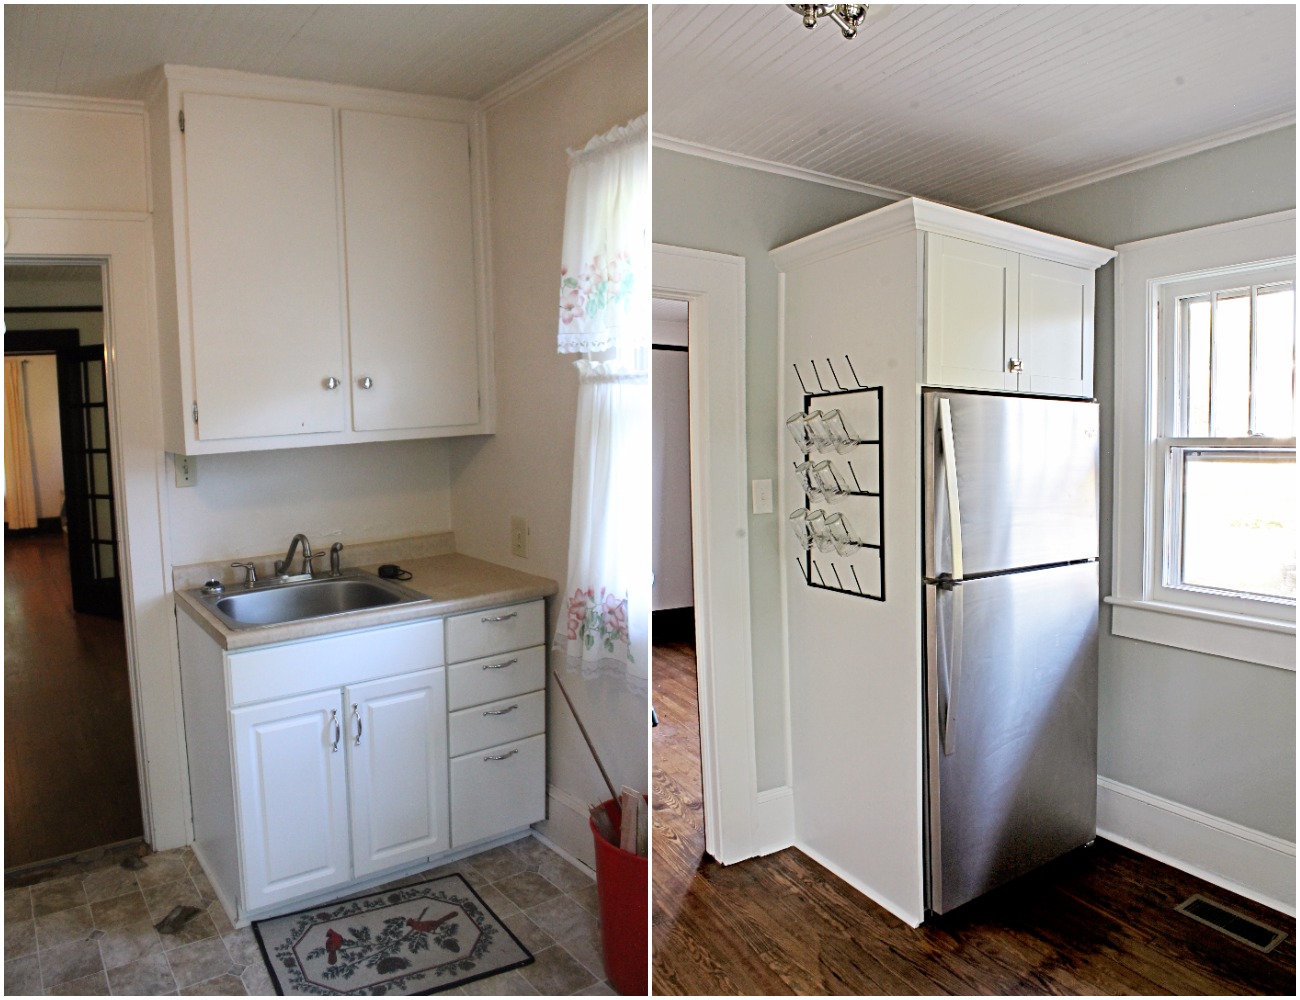 House Flipping Before and Afters - DIY BUDGET KITCHEN IDEAS WHITE SHAKER CABINETS (9).jpg